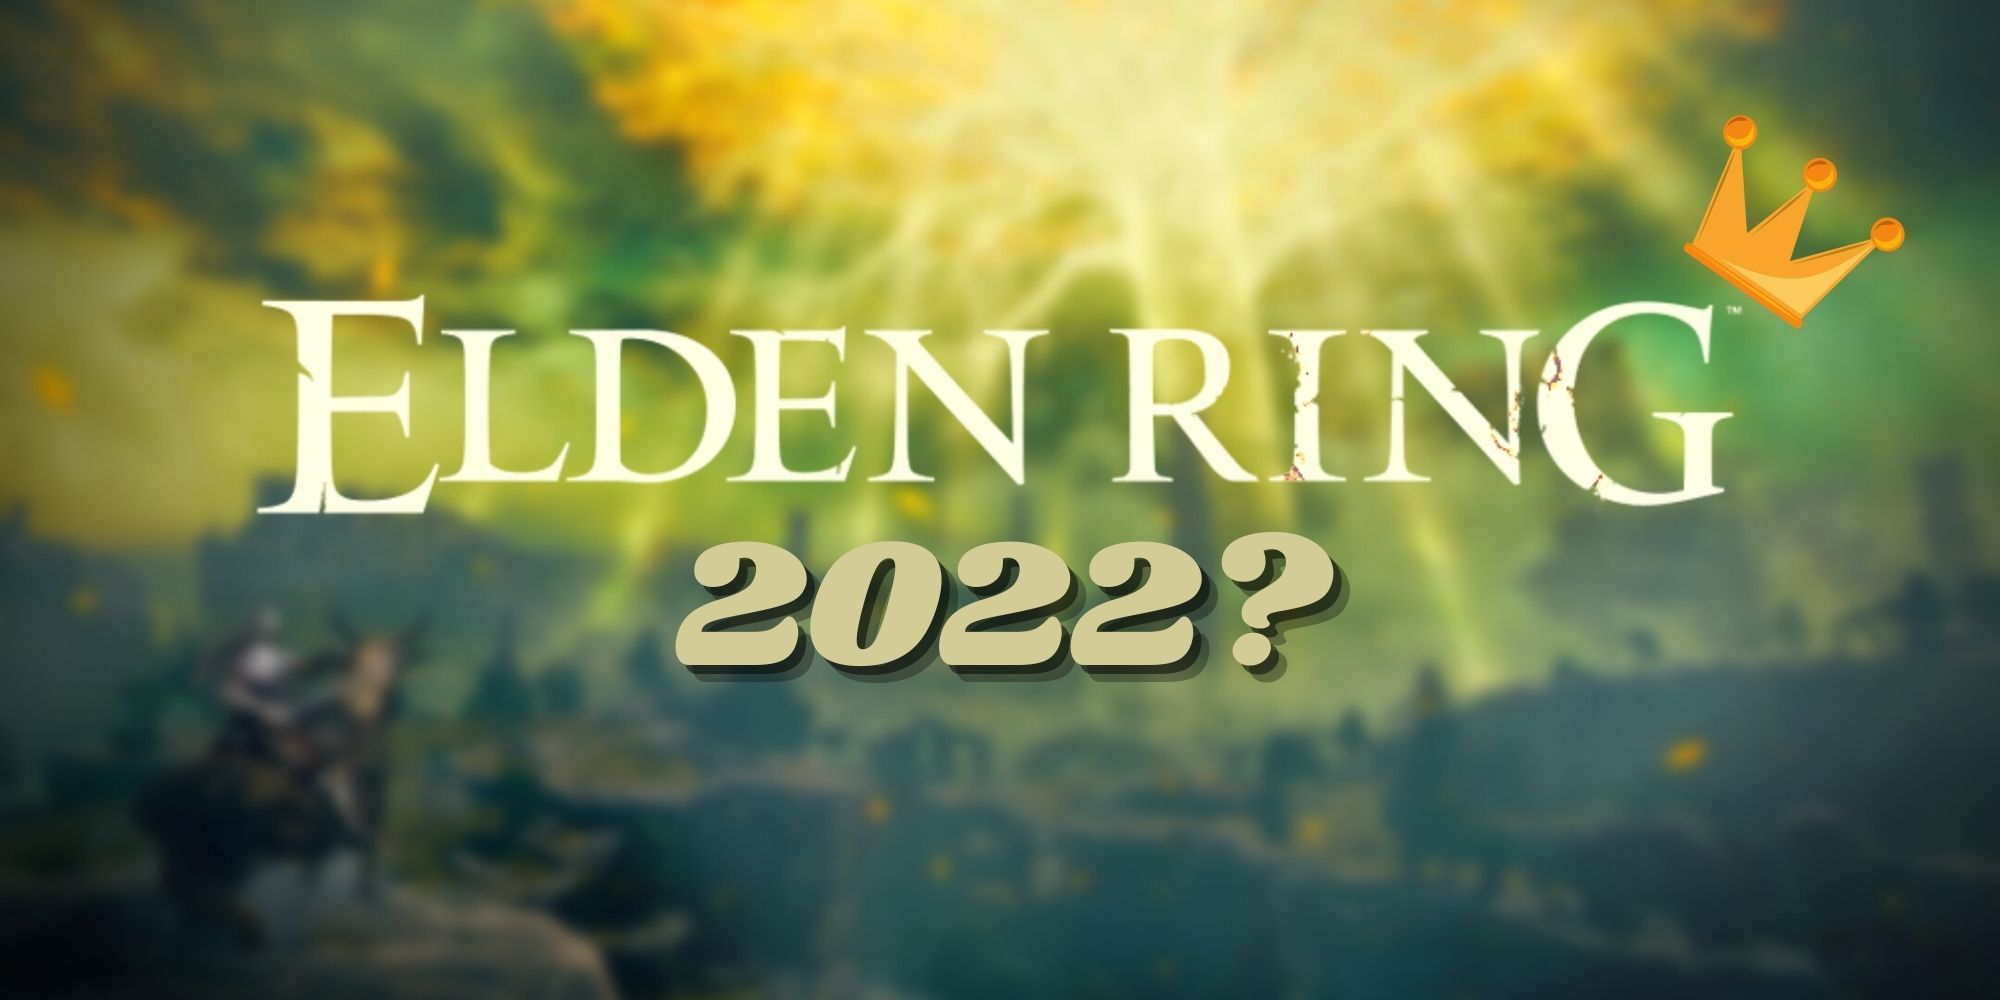 Why Elden Ring May Win Most Anticipated Game Award 3 Years In A Row